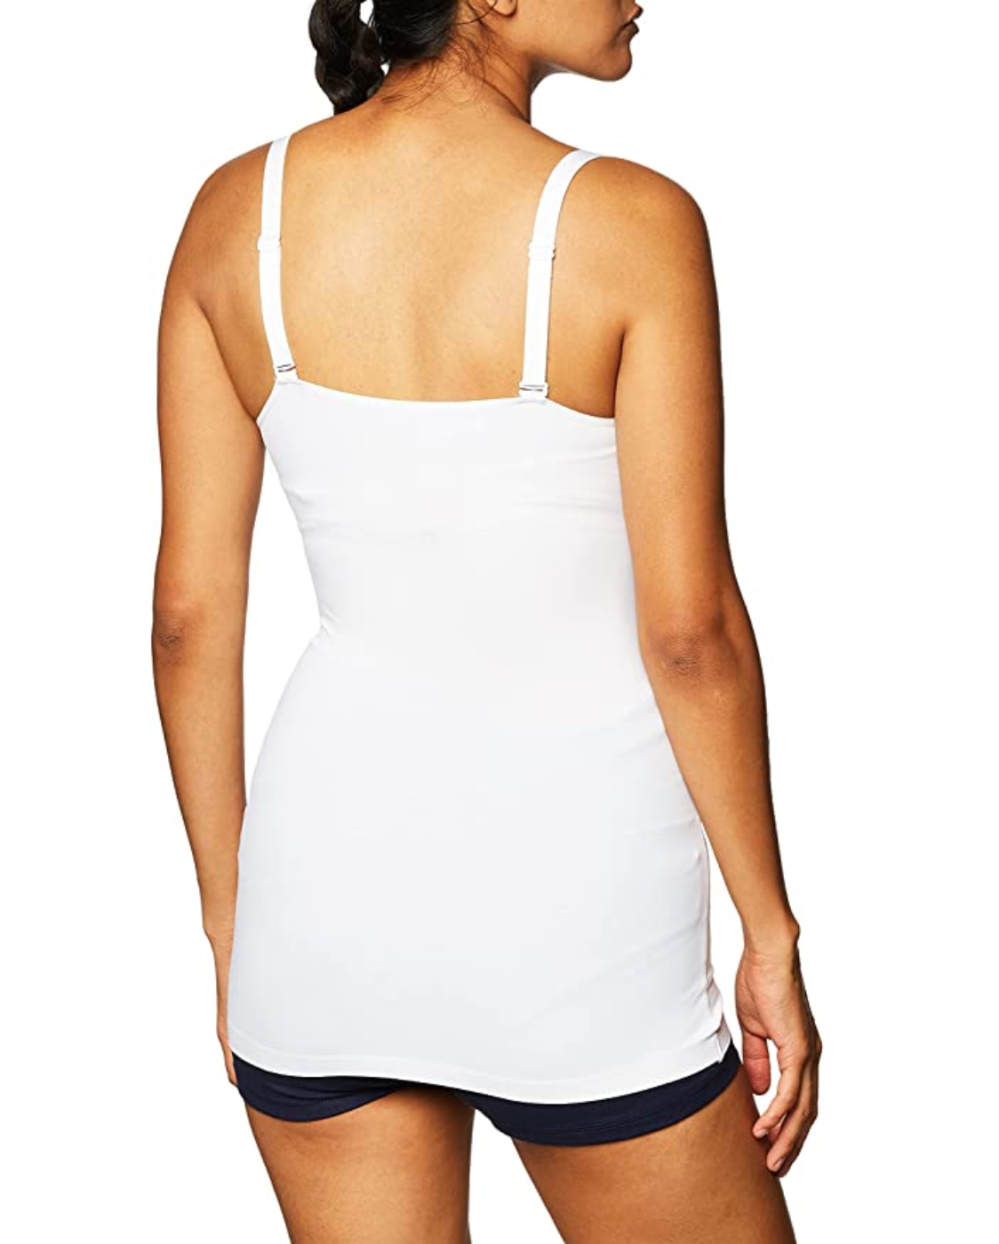 Maidenform Tank Top Is the Perfect Alternative to Wearing a